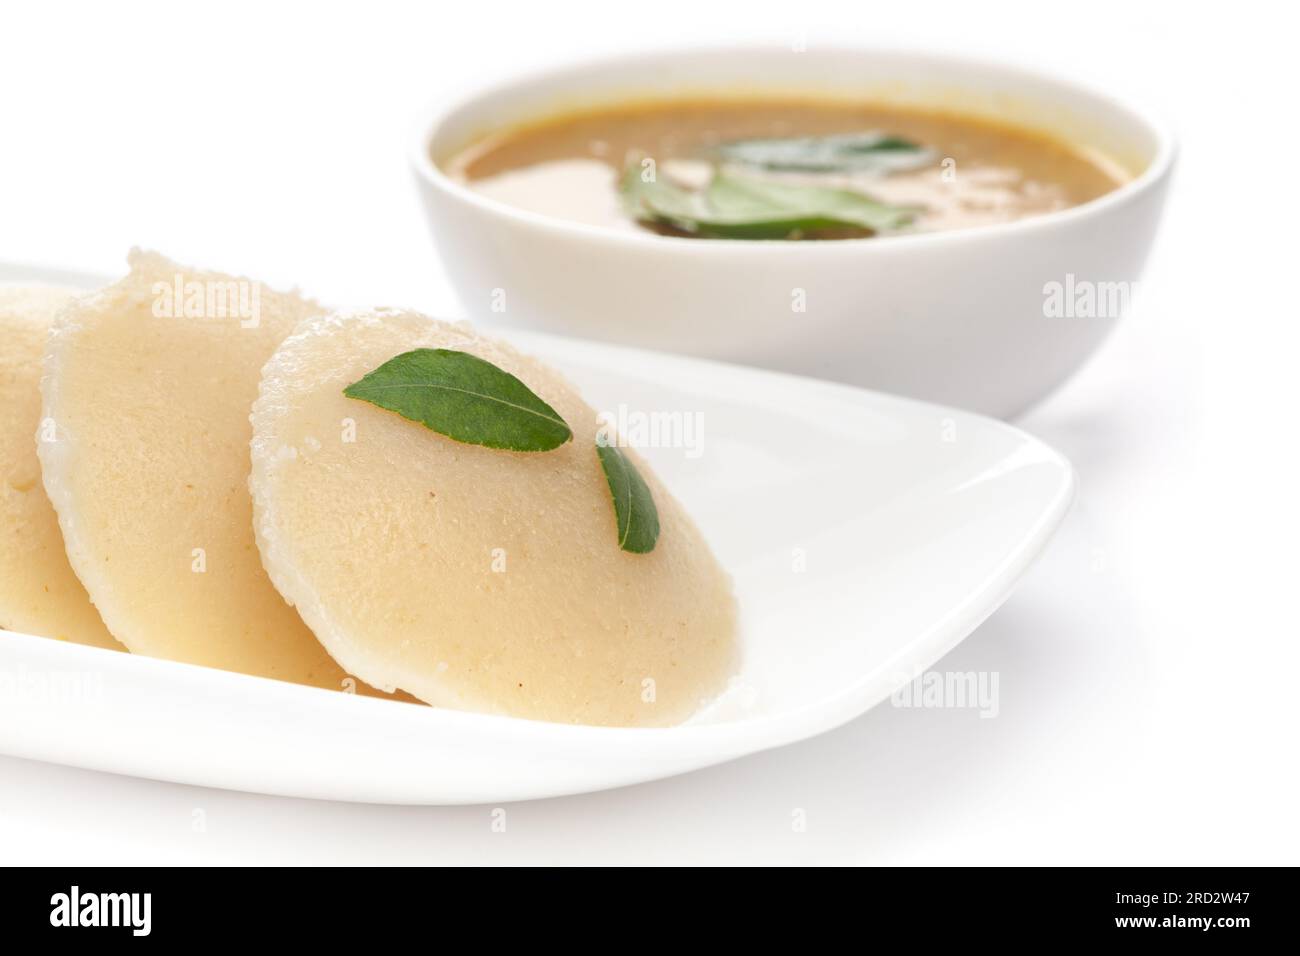 Close-up of Idli Sambhar or Idly Sambar is a popular south Indian food, served with coconut chutney. selective focus Stock Photo